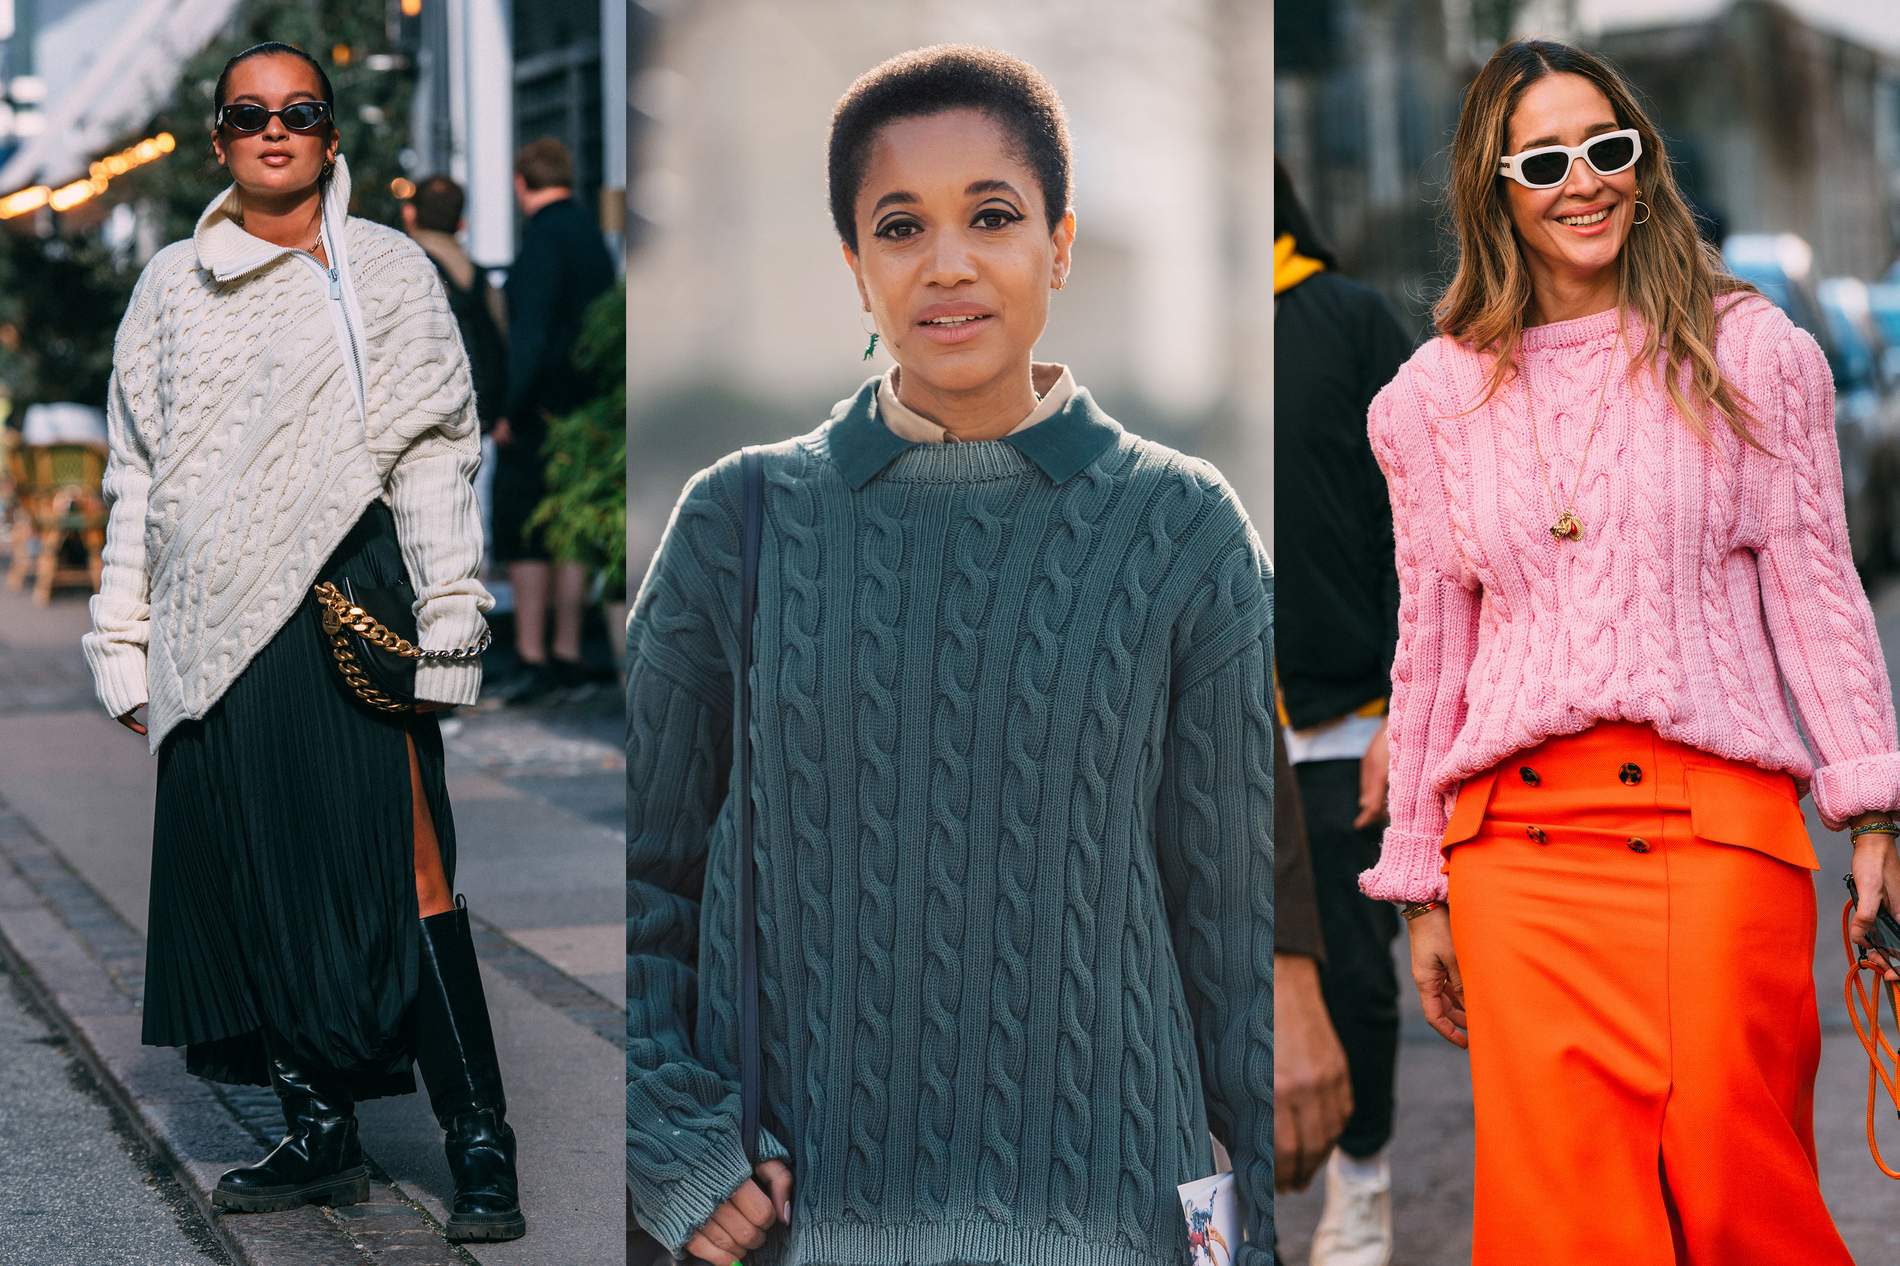 Are Cable Knit Sweaters In Style?